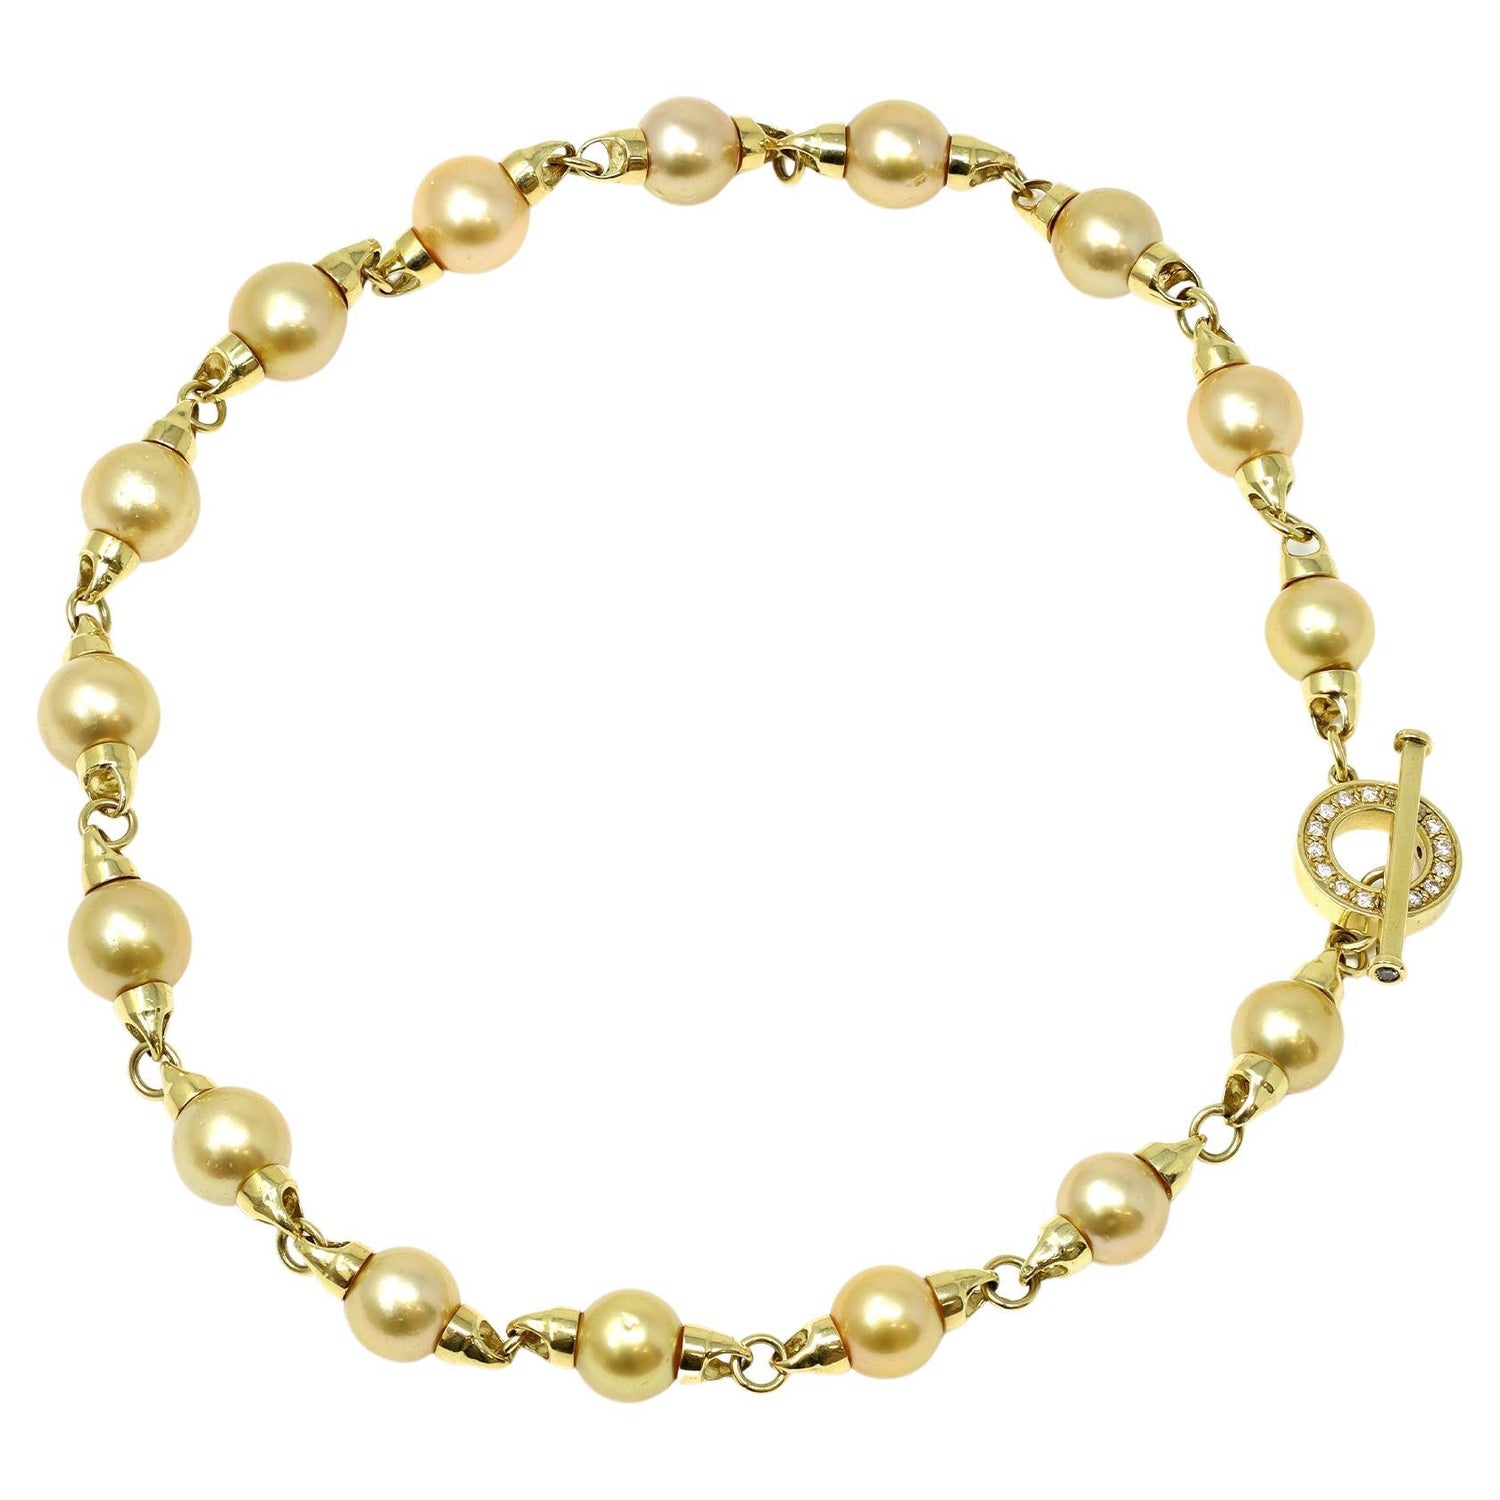 Leighton Convertible Gold Pearl Chain Necklace in White Pearl